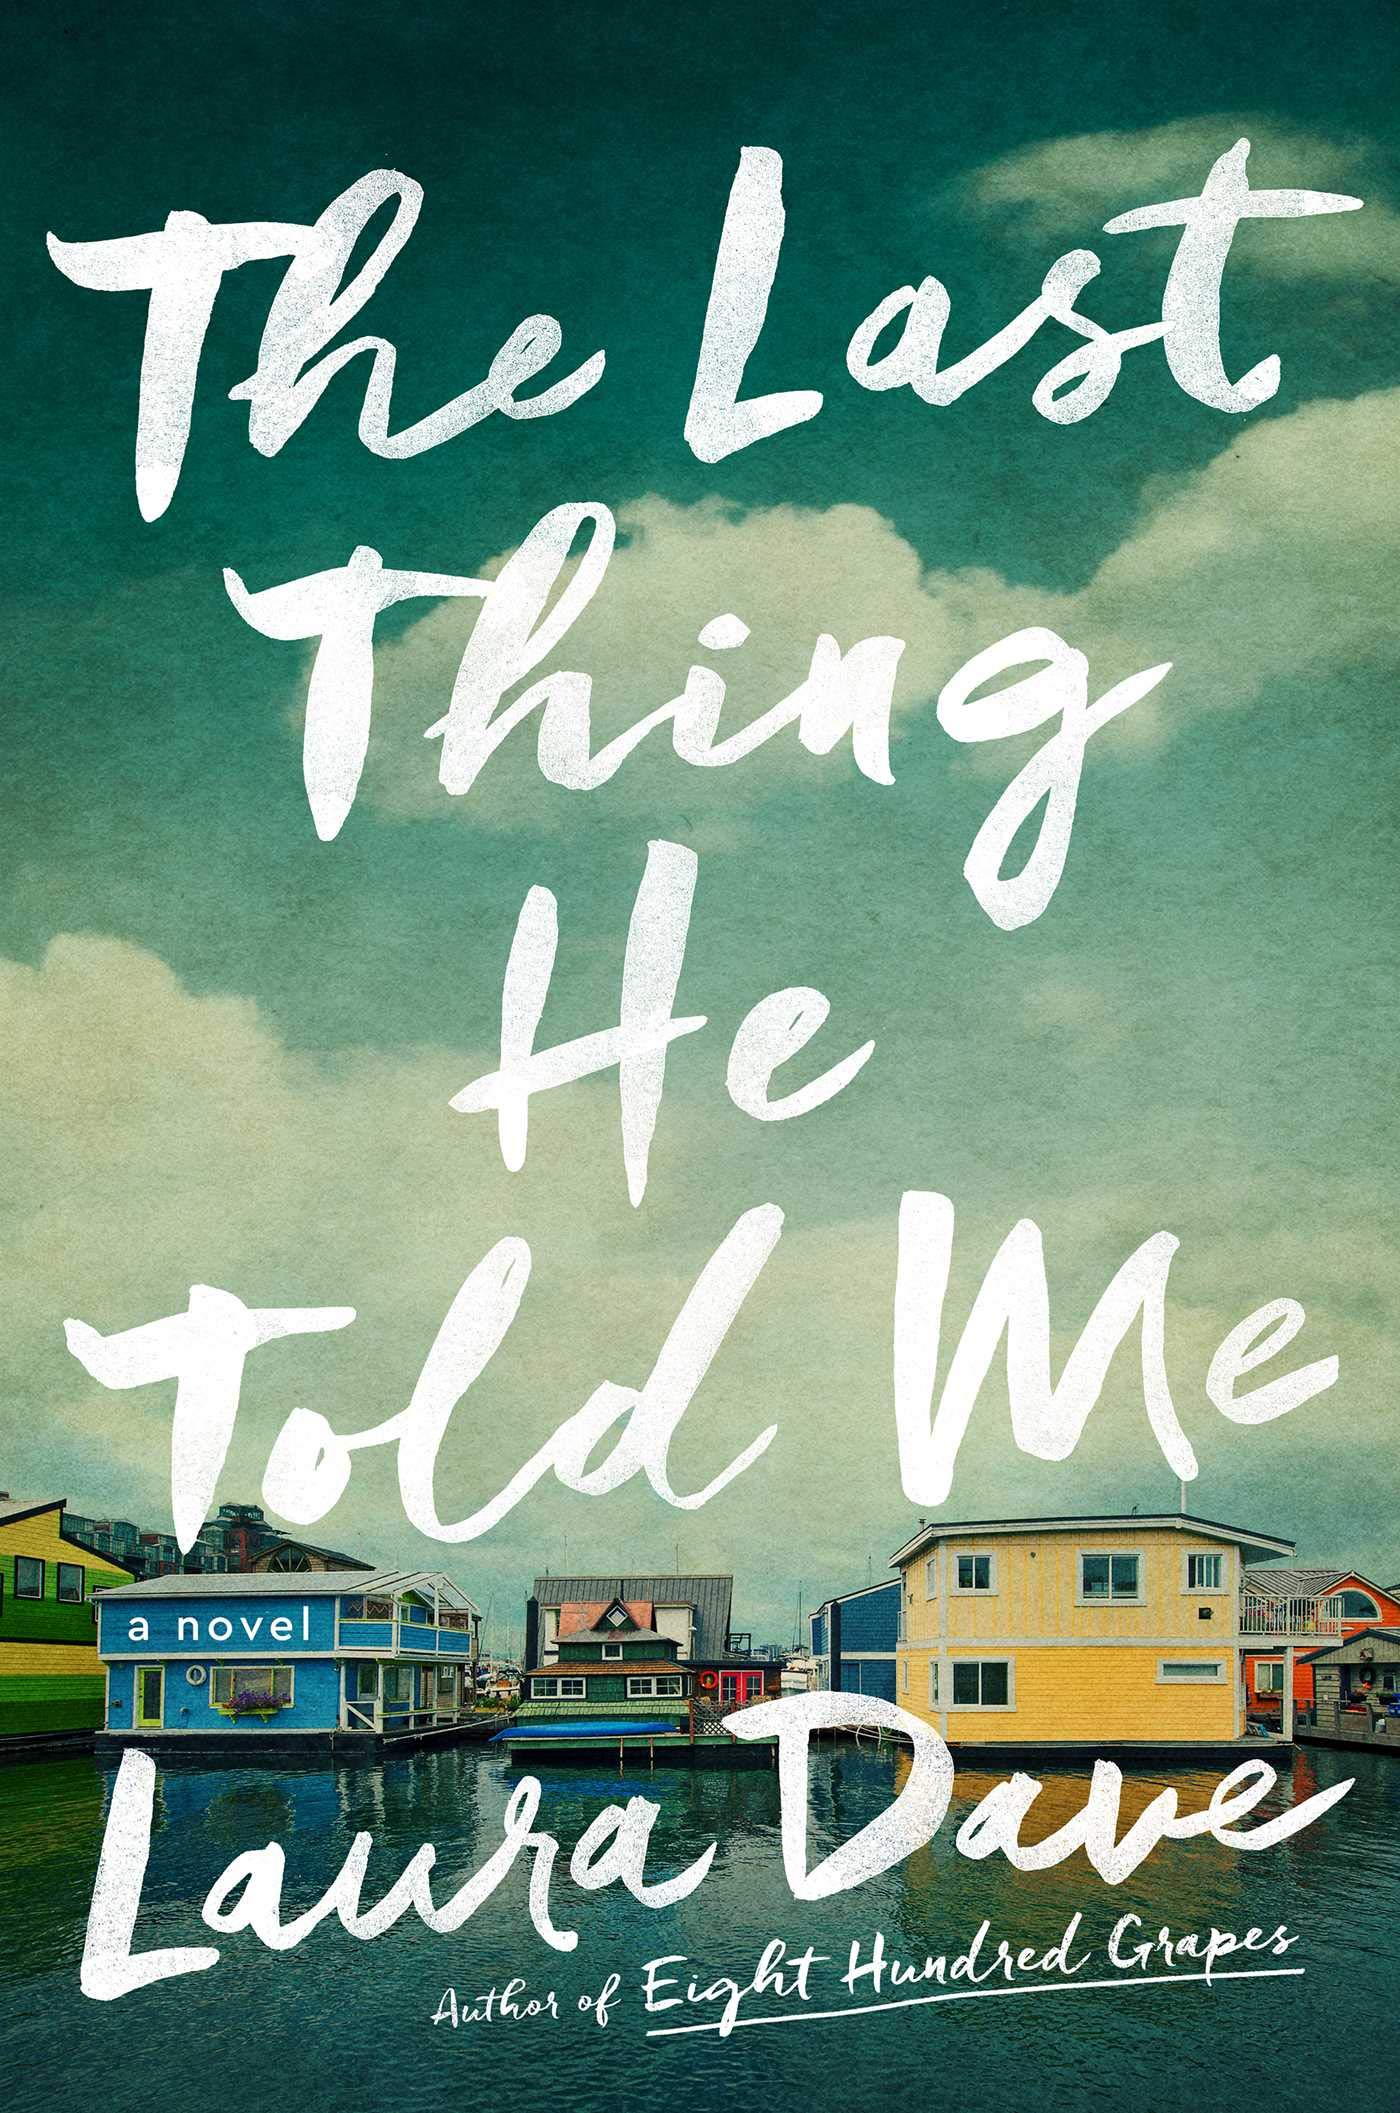 image for "The Last Thing He Told Me"